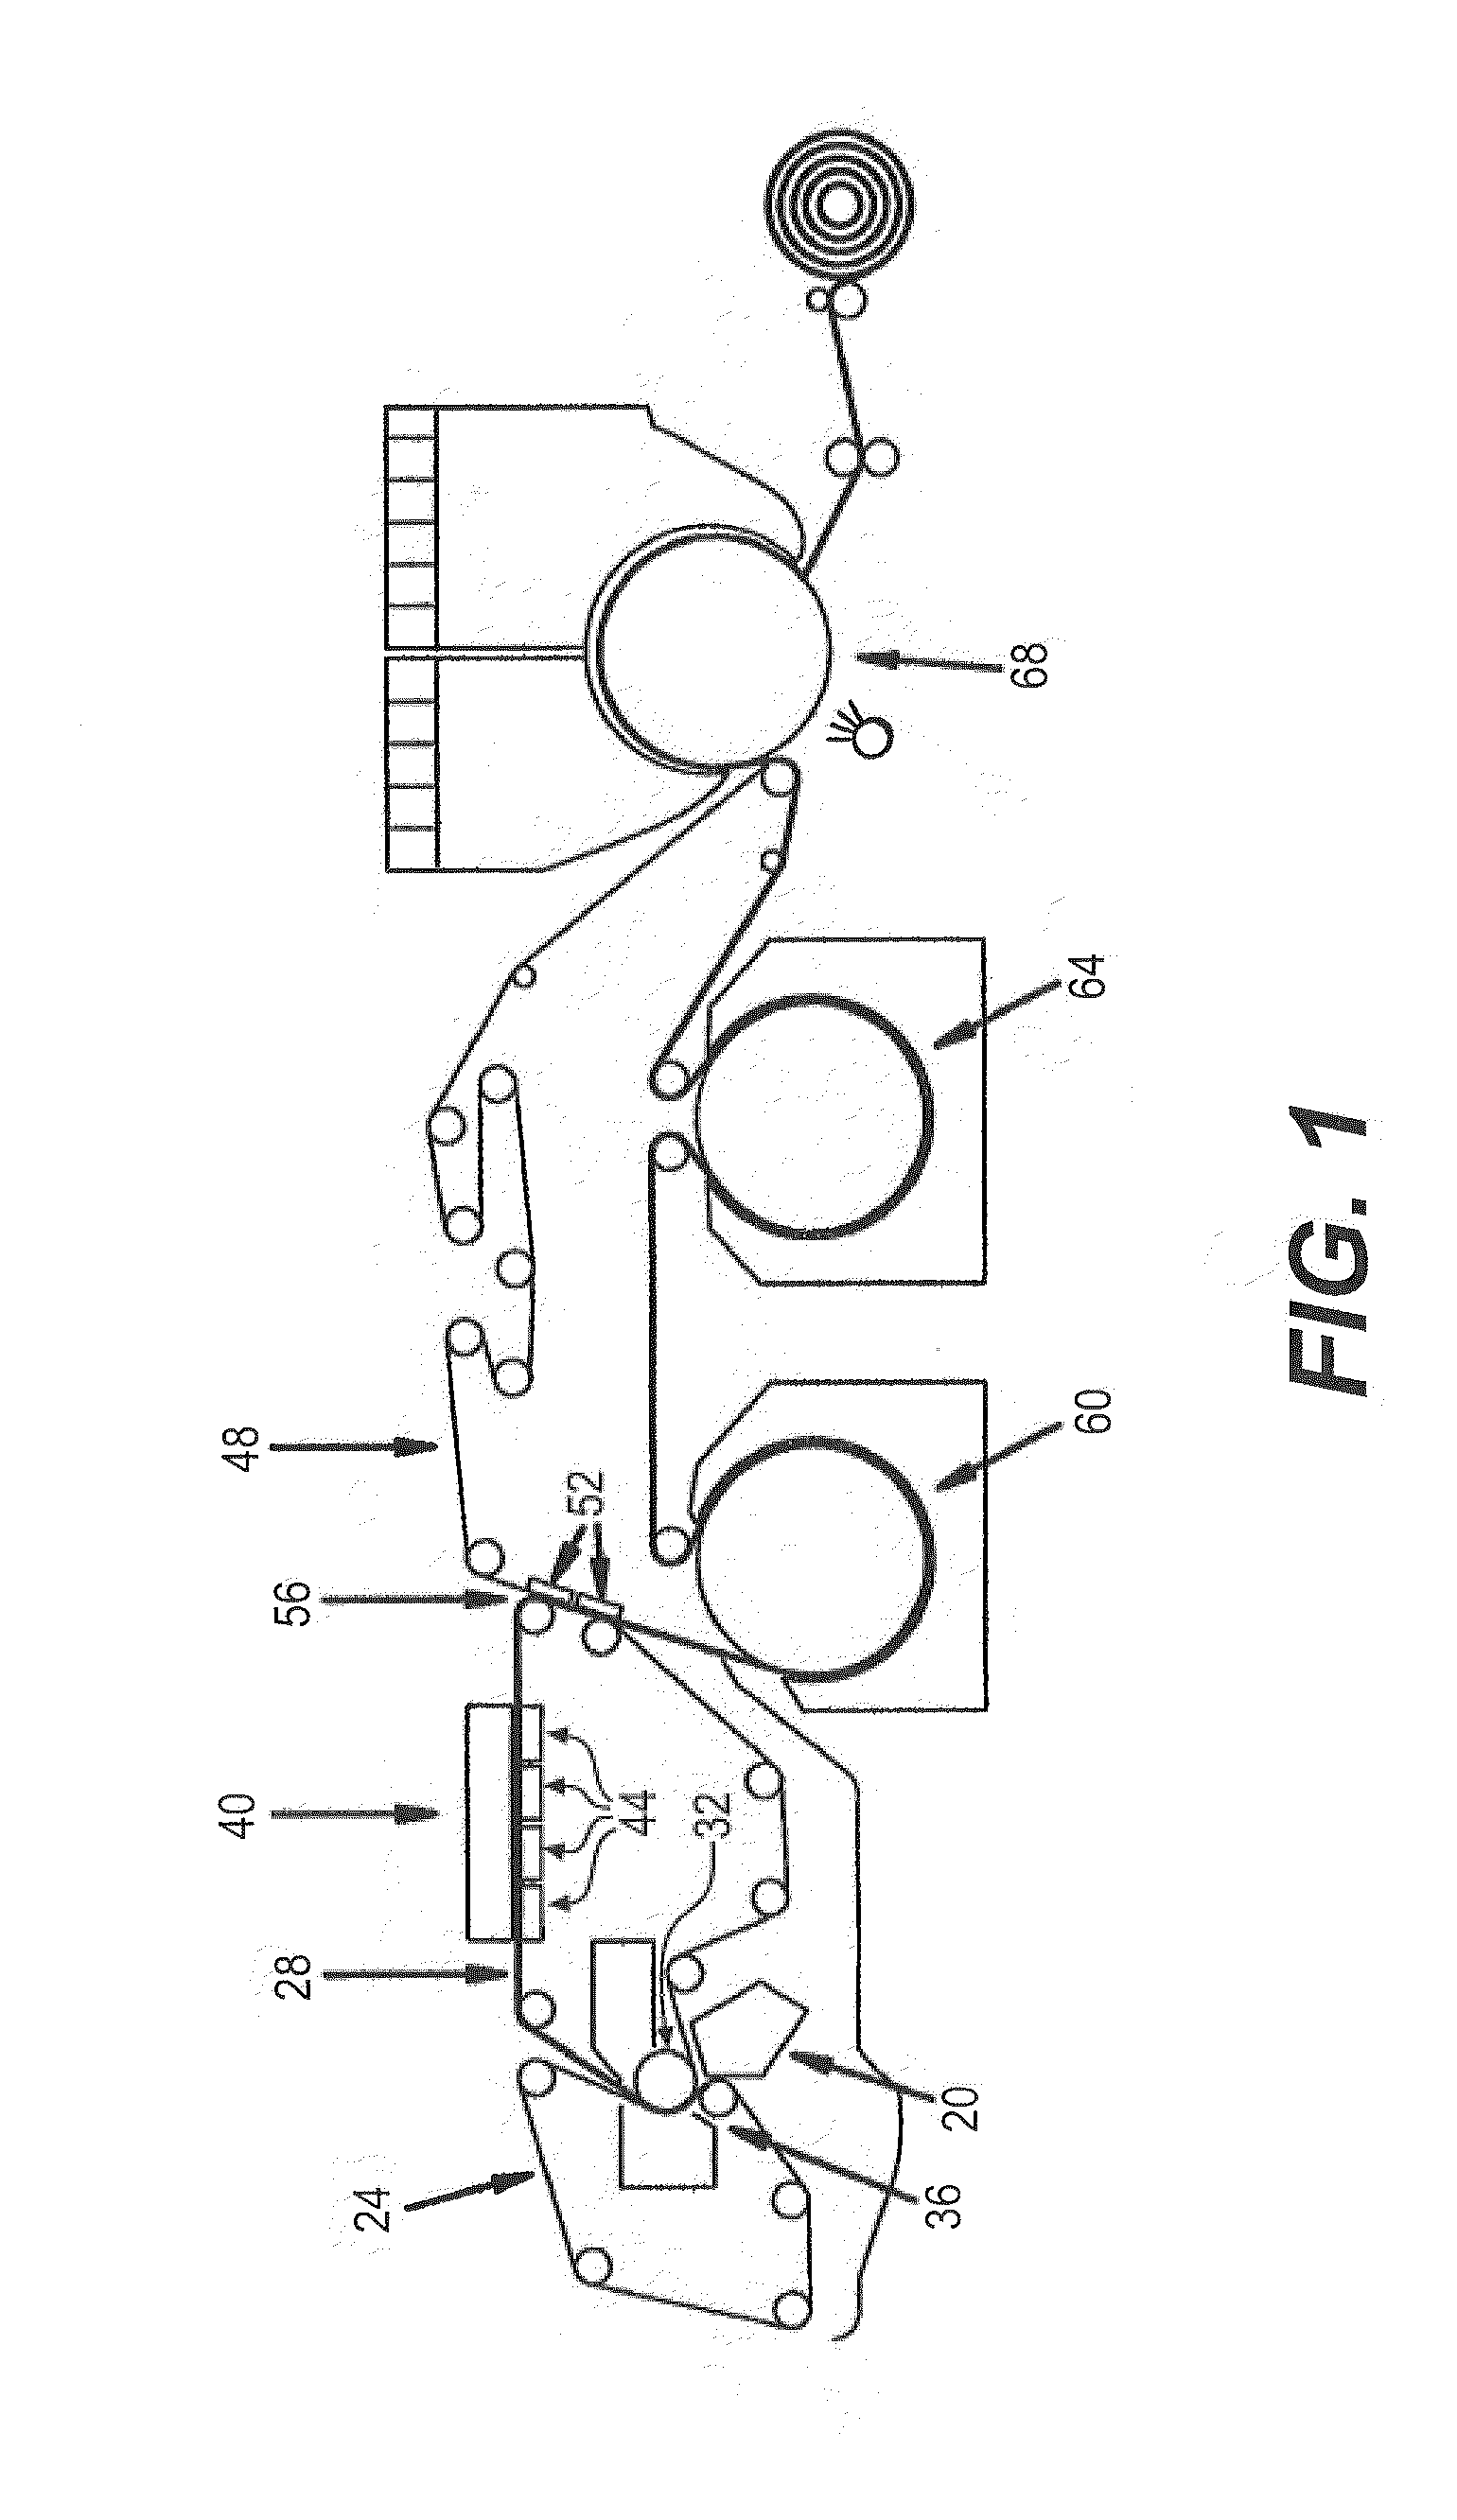 Apparatus, system, and process for determining characteristics of a surface of a papermaking fabric